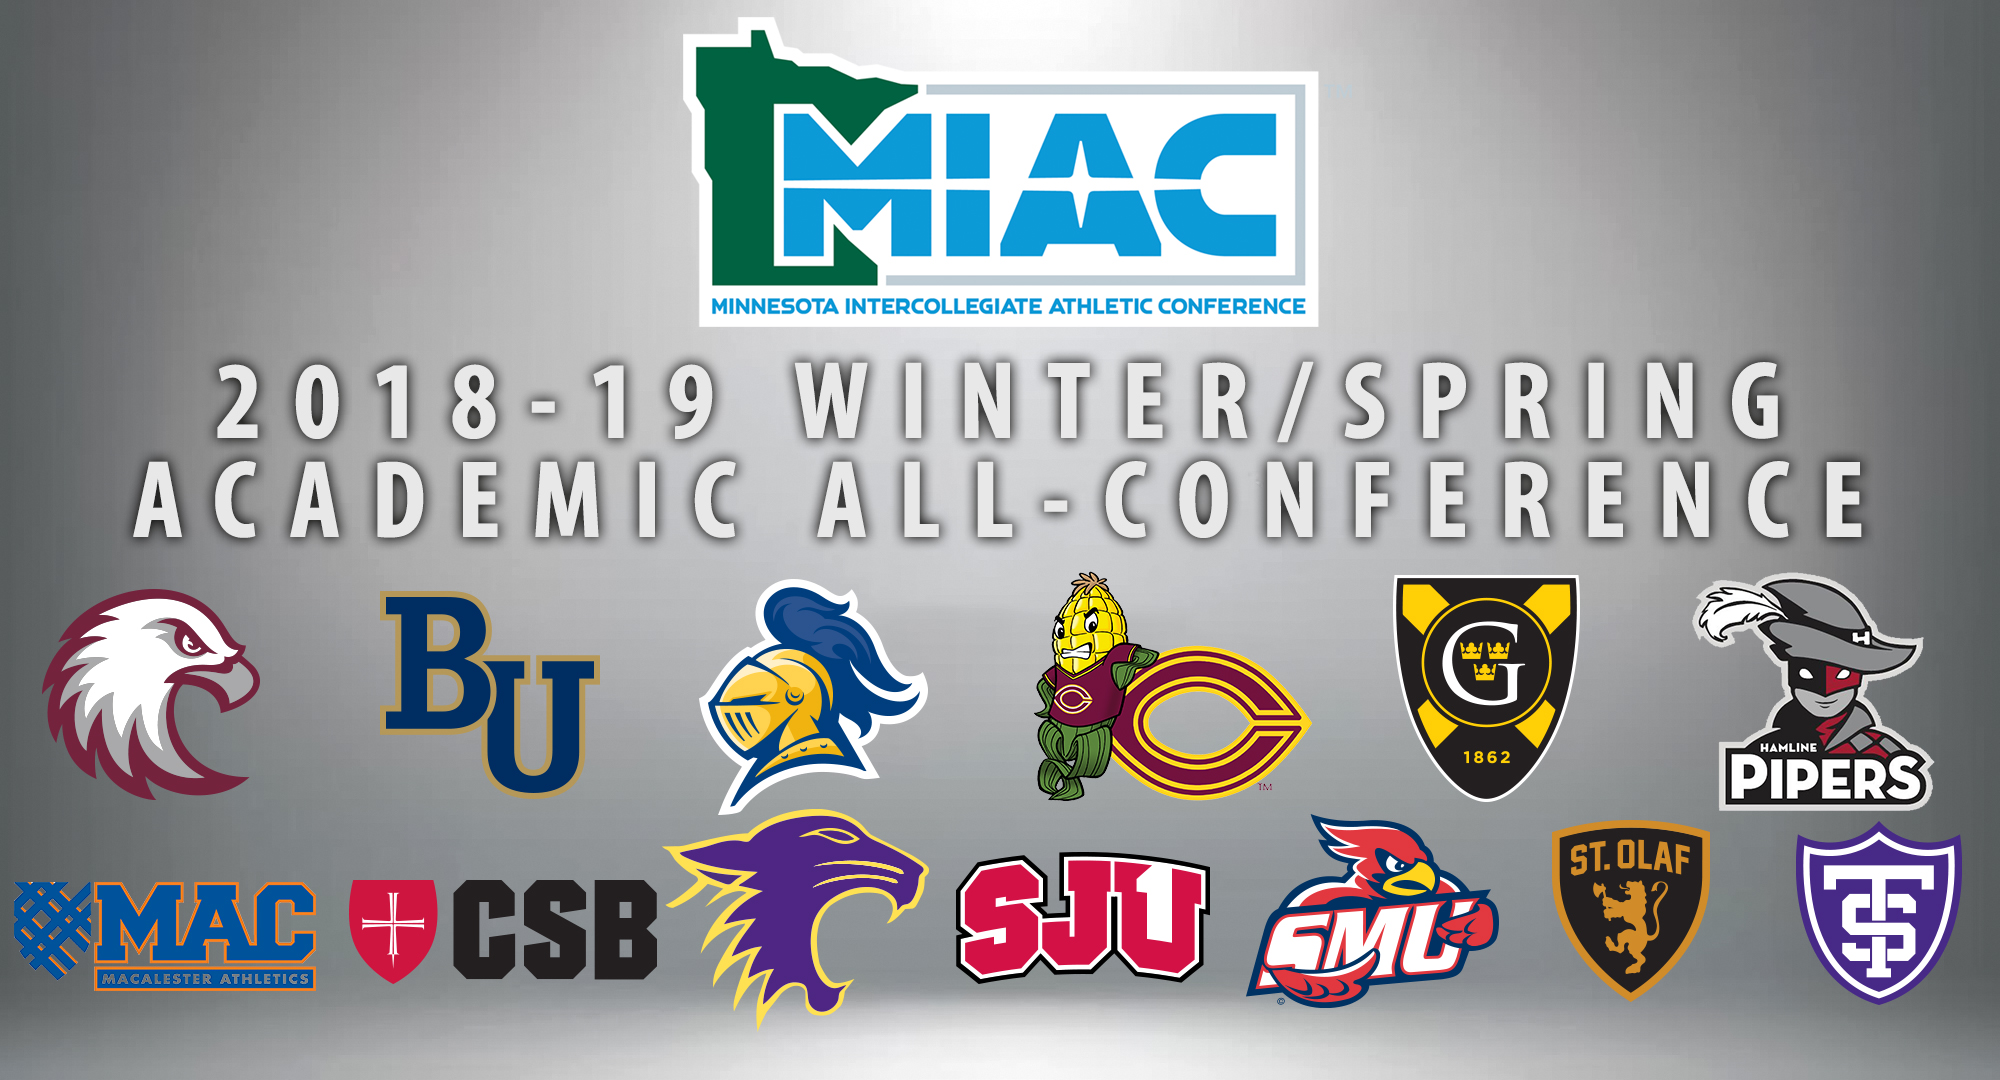 Concordia  had a record-setting 56 student/athletes earned MIAC Academic All-Conference honors for the winter and spring sports seasons.